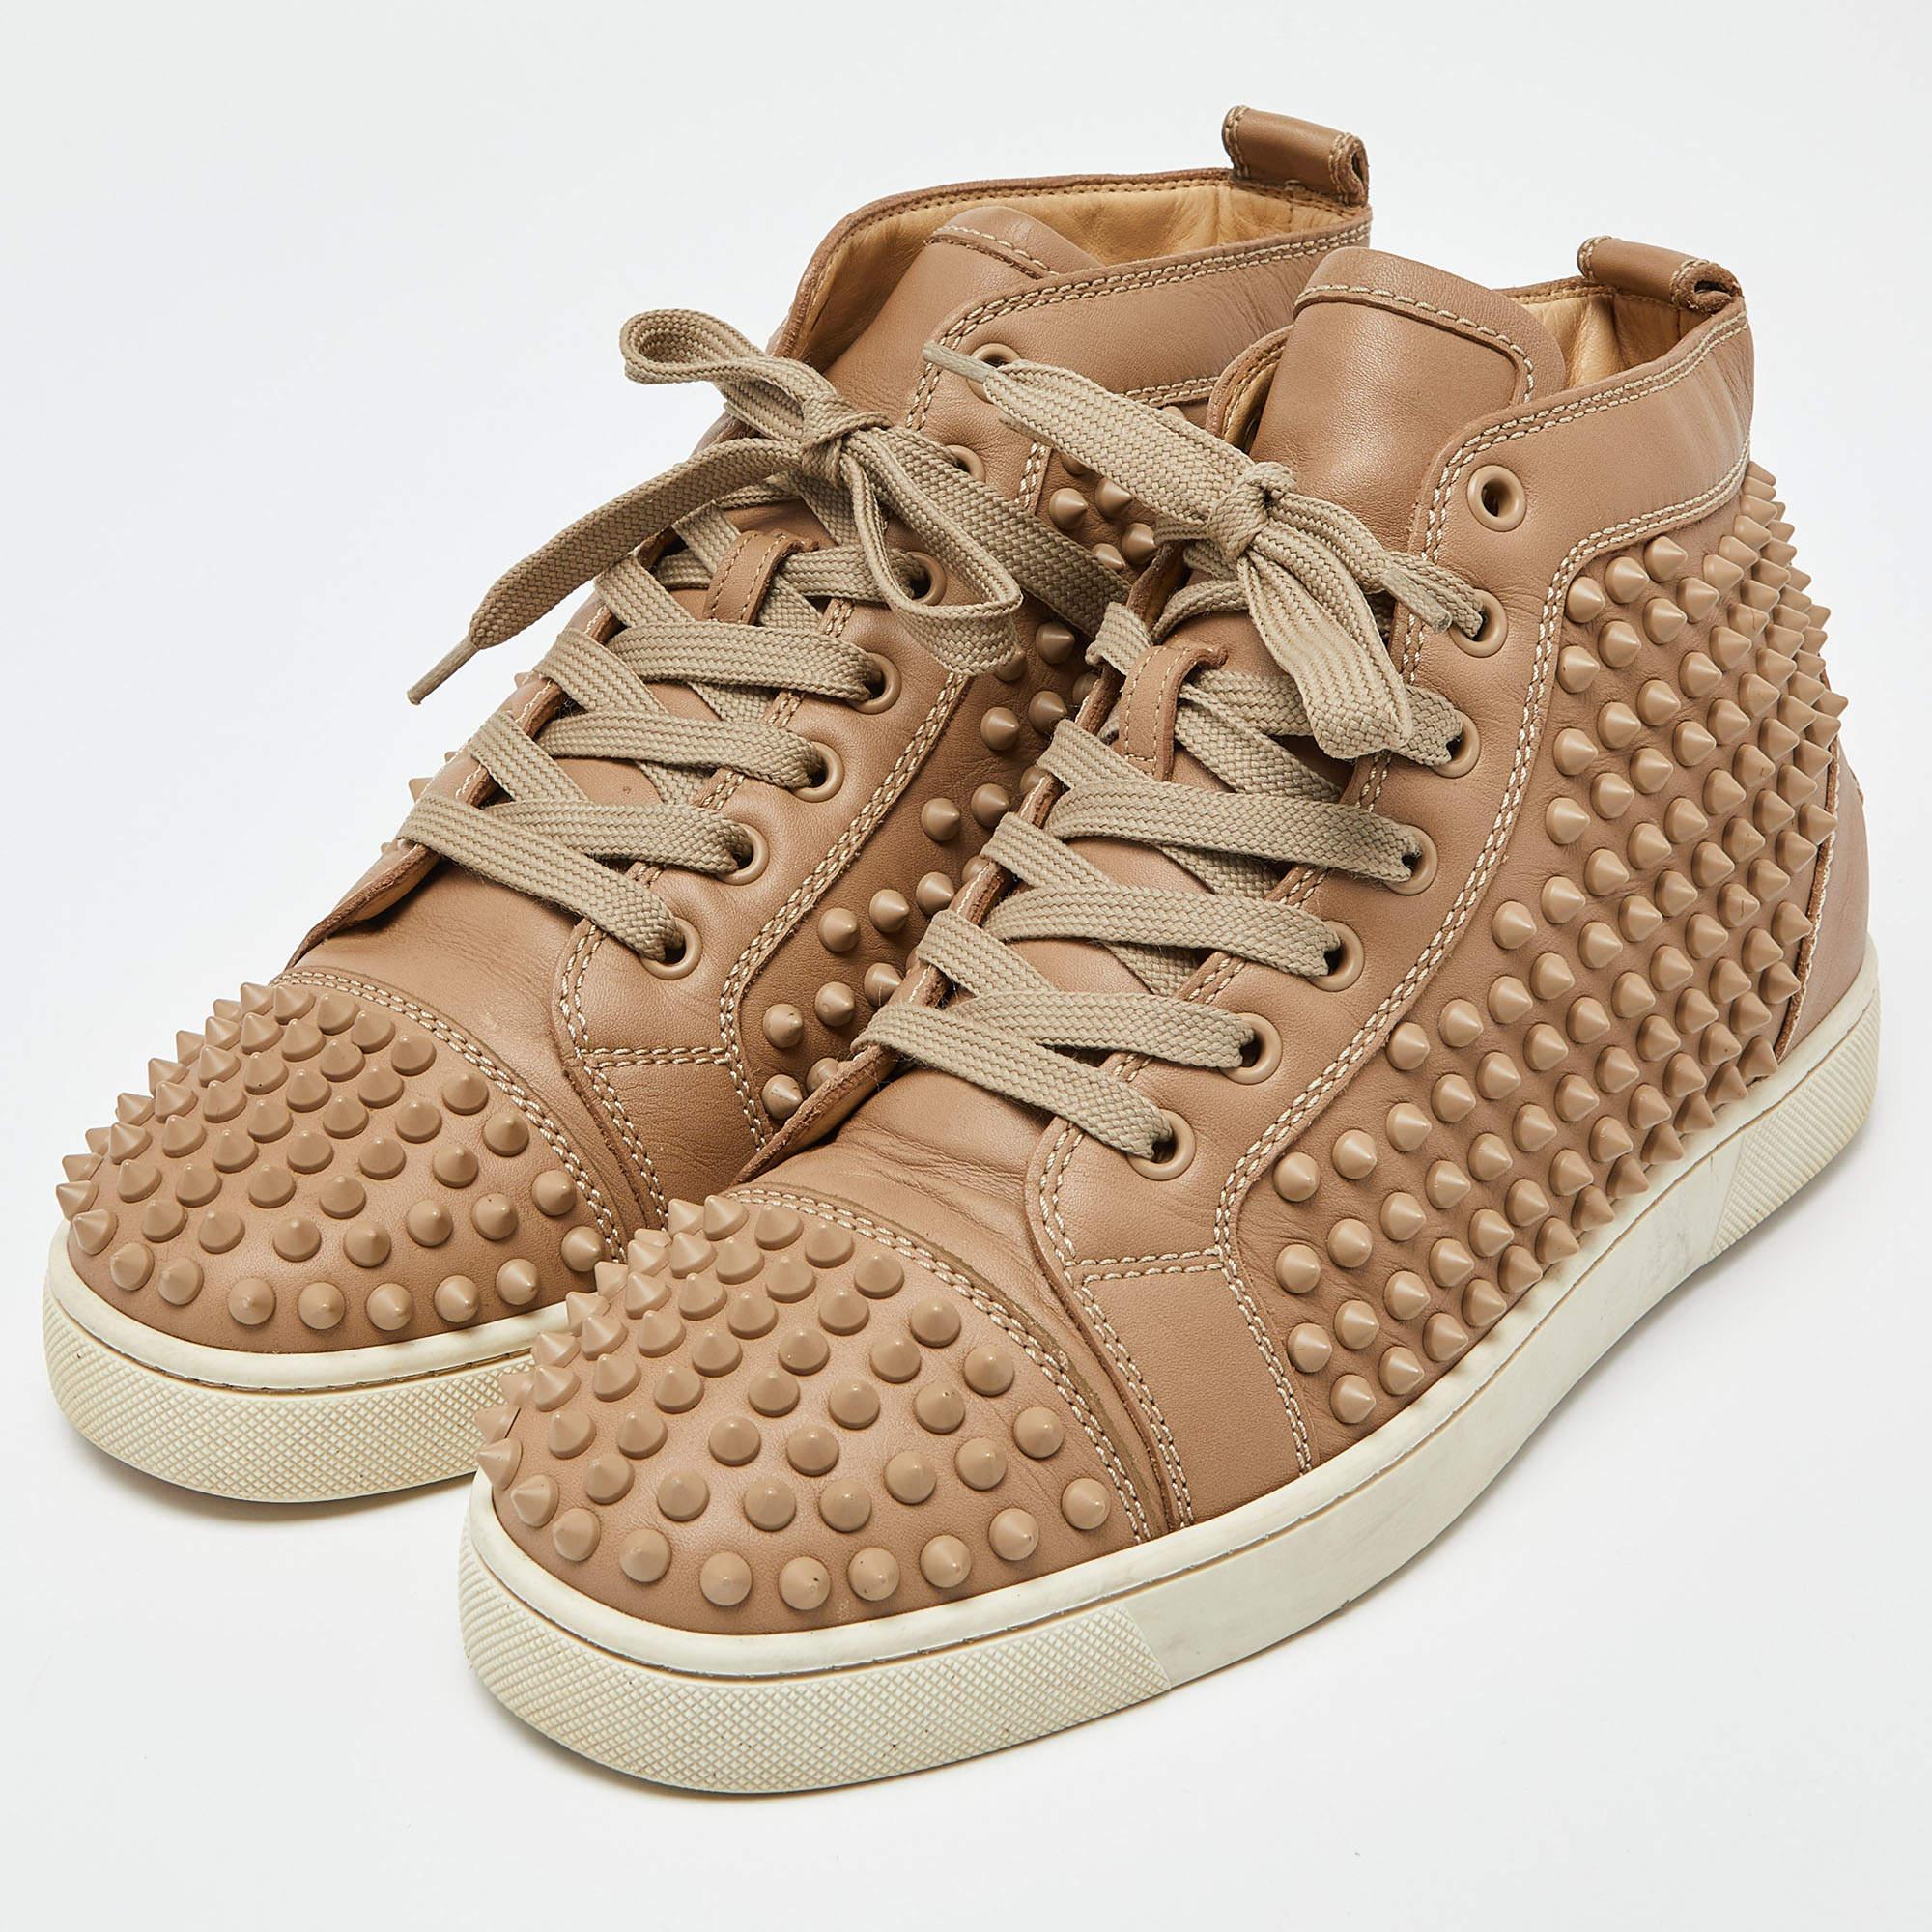 Women's Christian Louboutin Beige Leather Louis Spike High Top Sneakers Size 39.5 For Sale